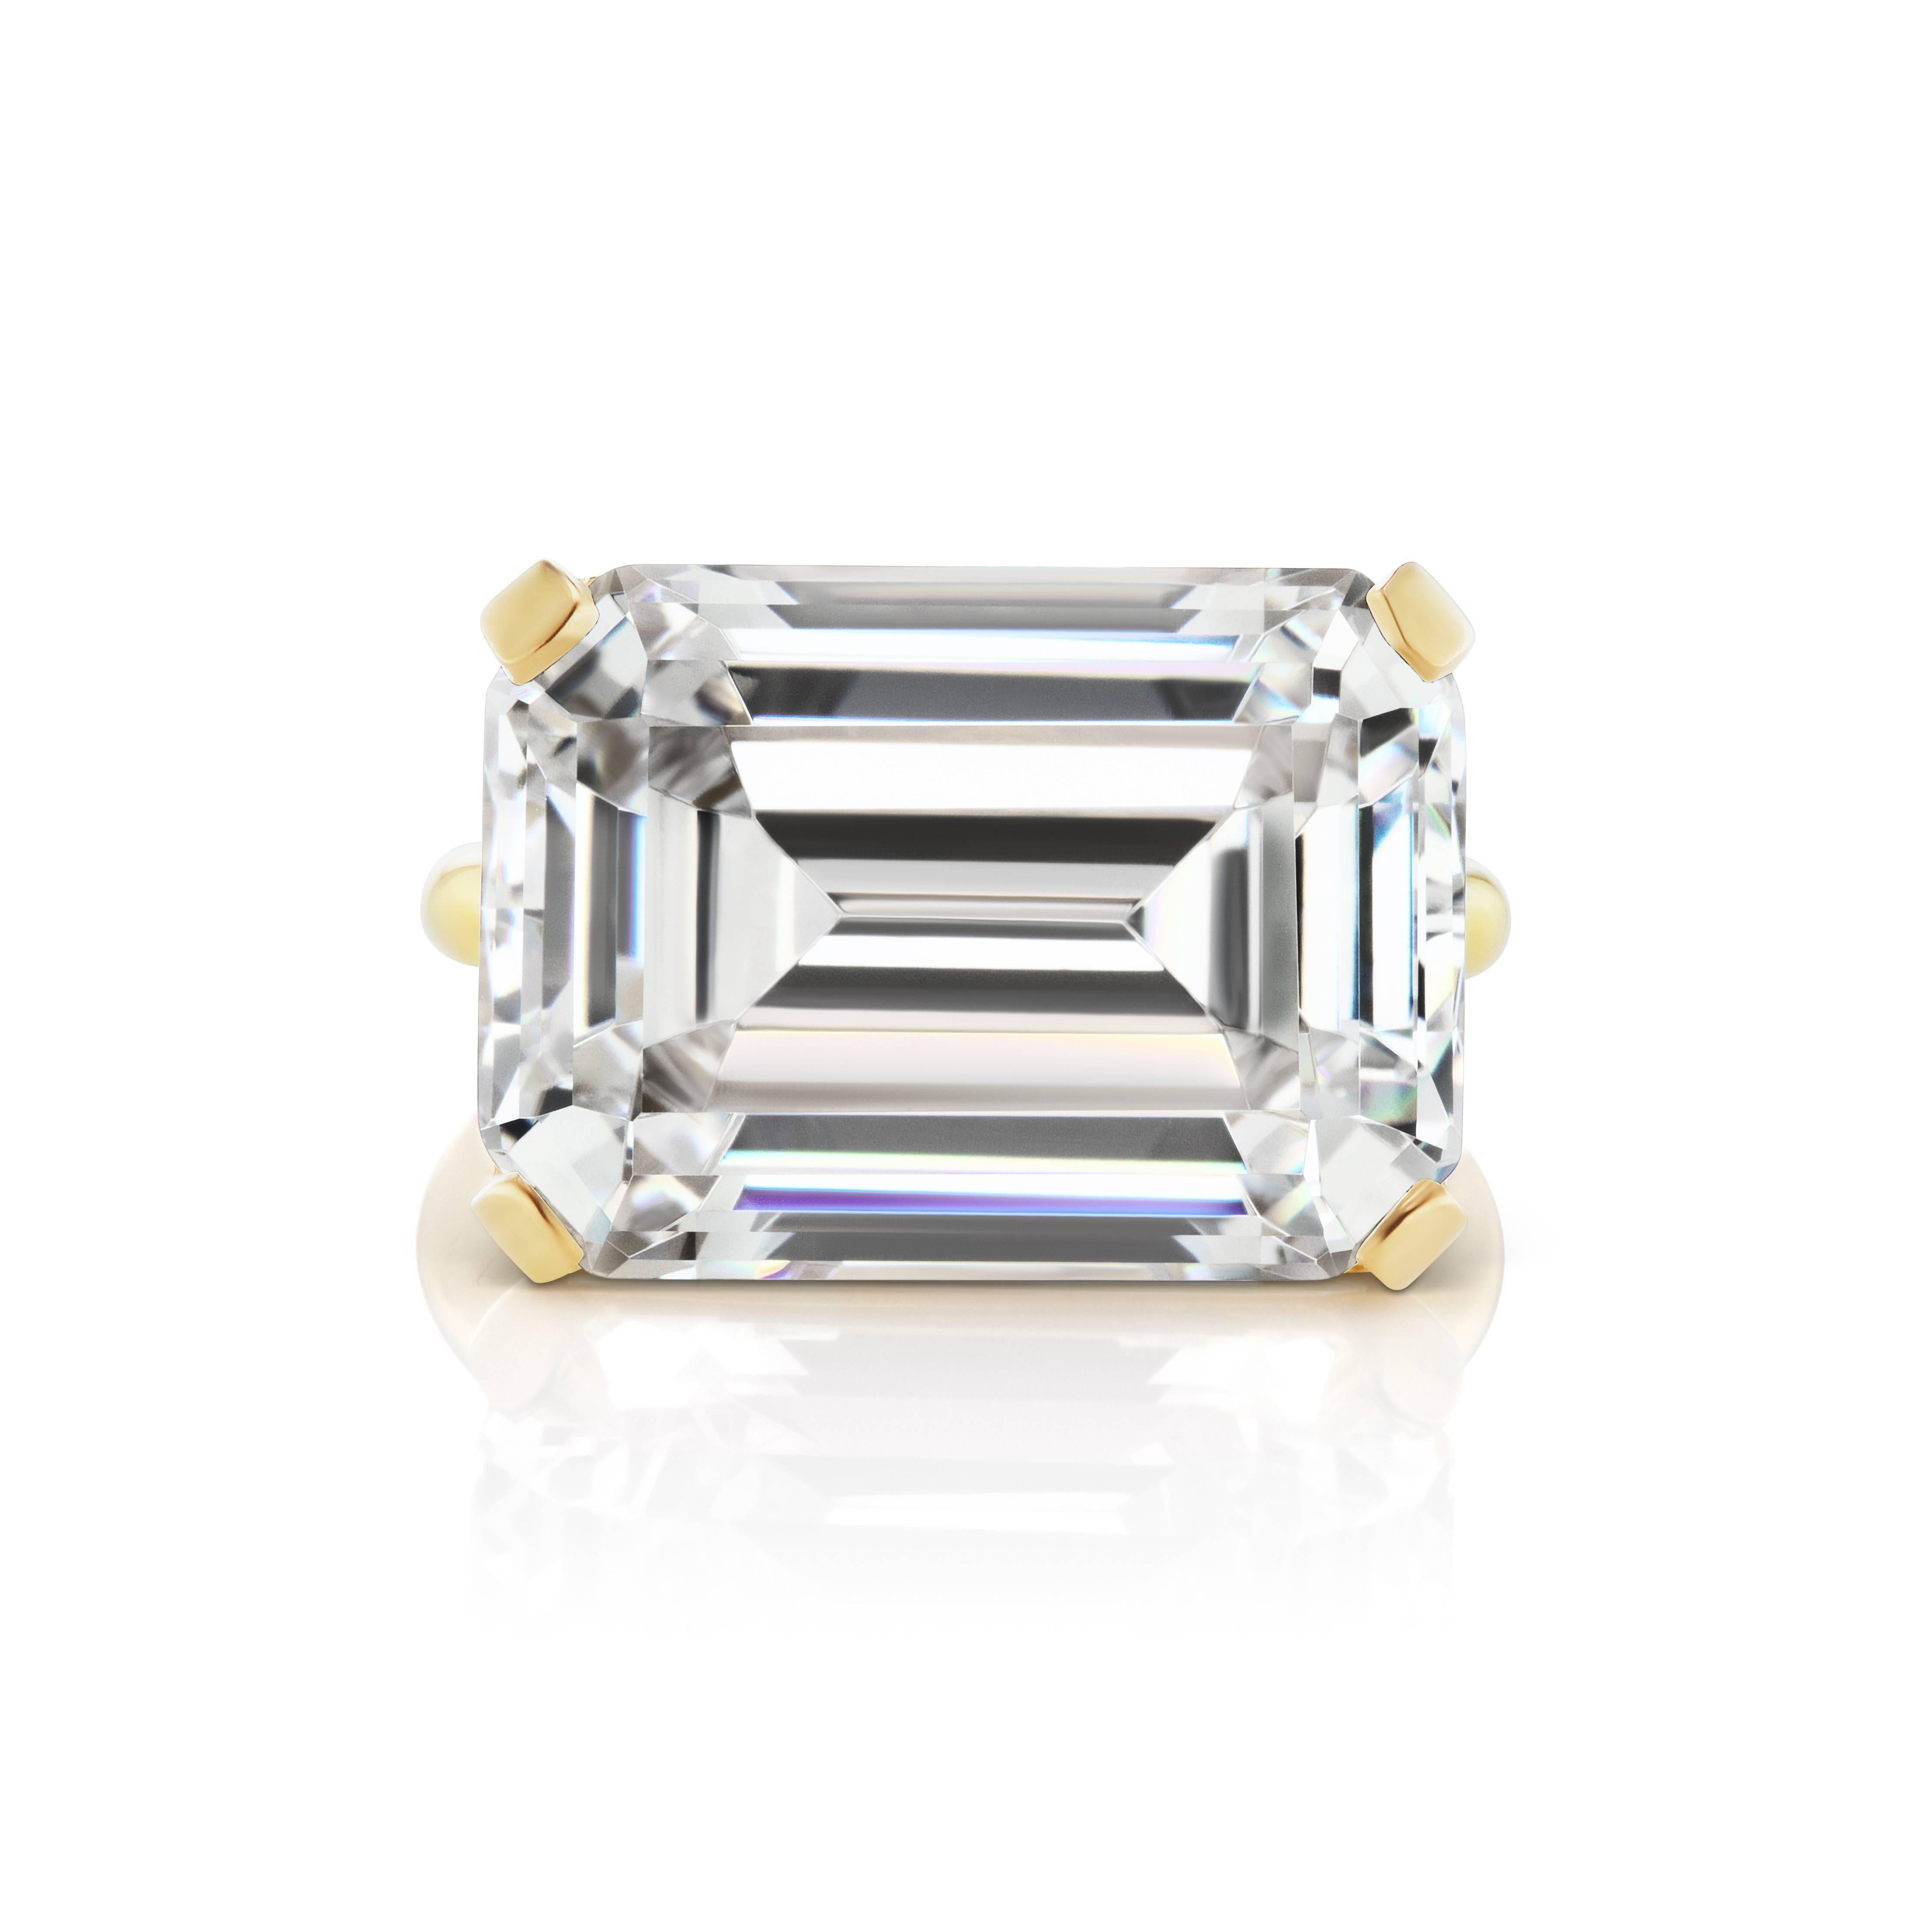 Magnificent  Costume Jewelry Faux Emerald Cut 15 Carat Diamond  Contemporary Modern Vermeil Setting Ring. This Newly Designed Ring Measure 3/4 inch across, half an inch wide and sits 1/4 inch on the finger. Chic Bold Impressive. Free sizing.